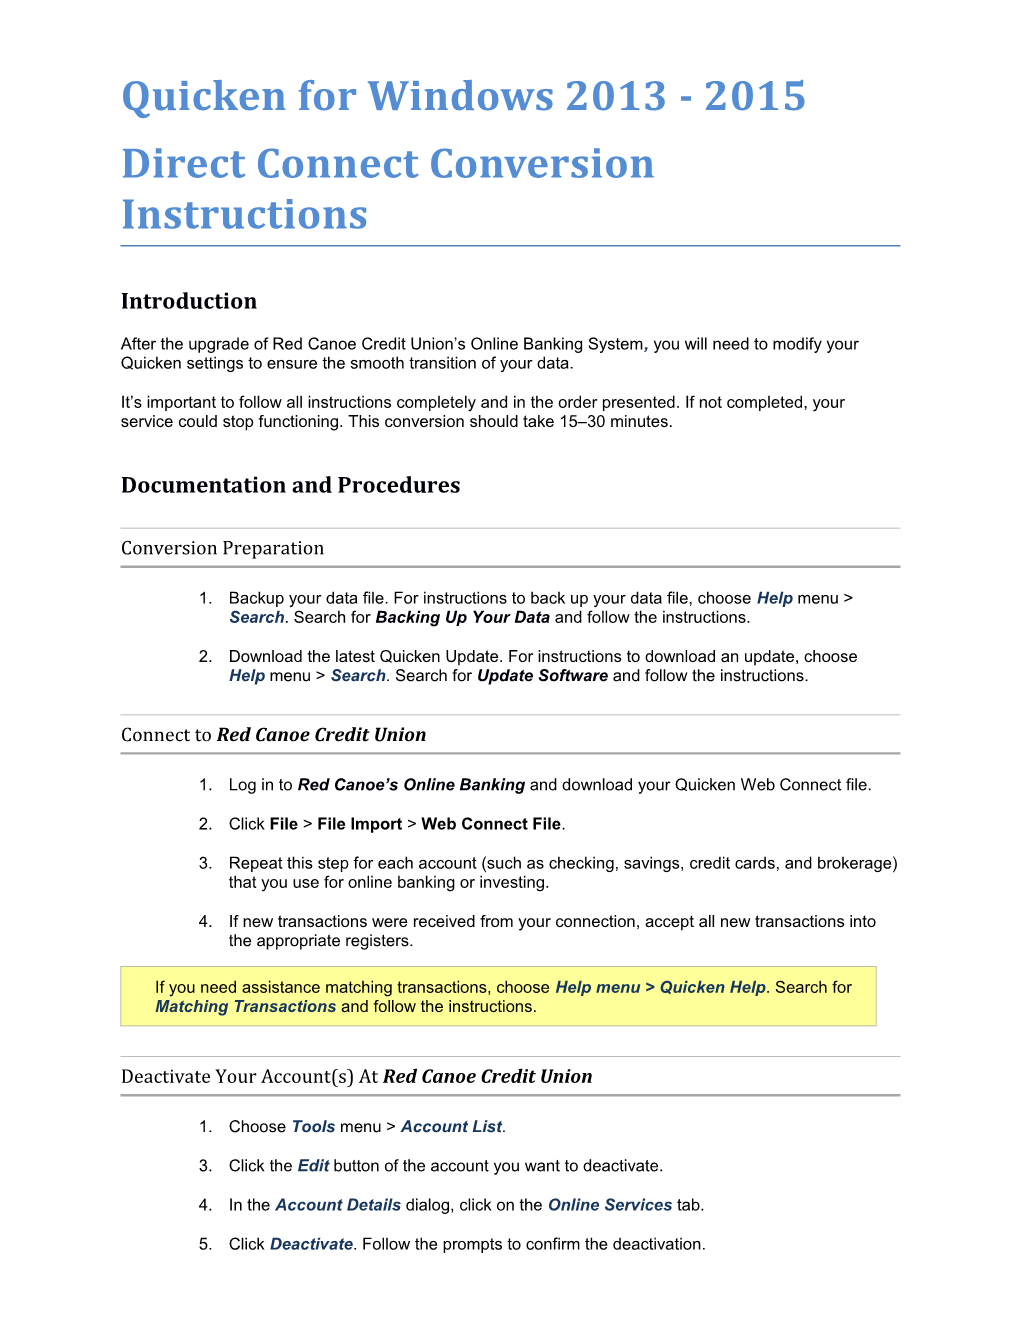 Direct Connect Conversion Instructions